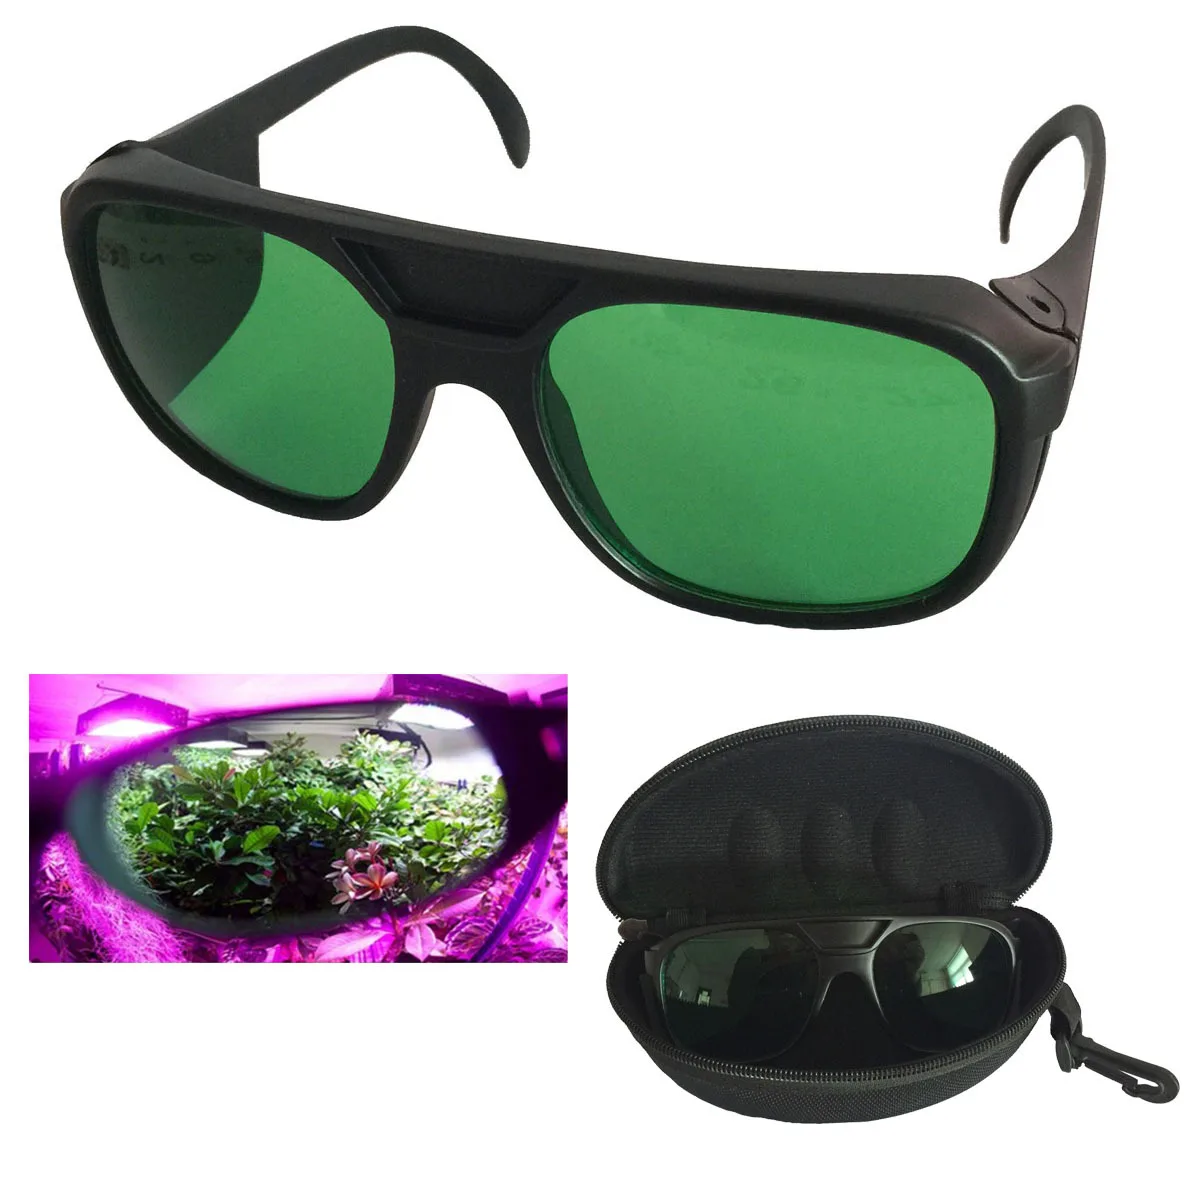 Plant growth light supplement lamp glasses LED multi-function anti ultraviolet red green color anti red light goggles